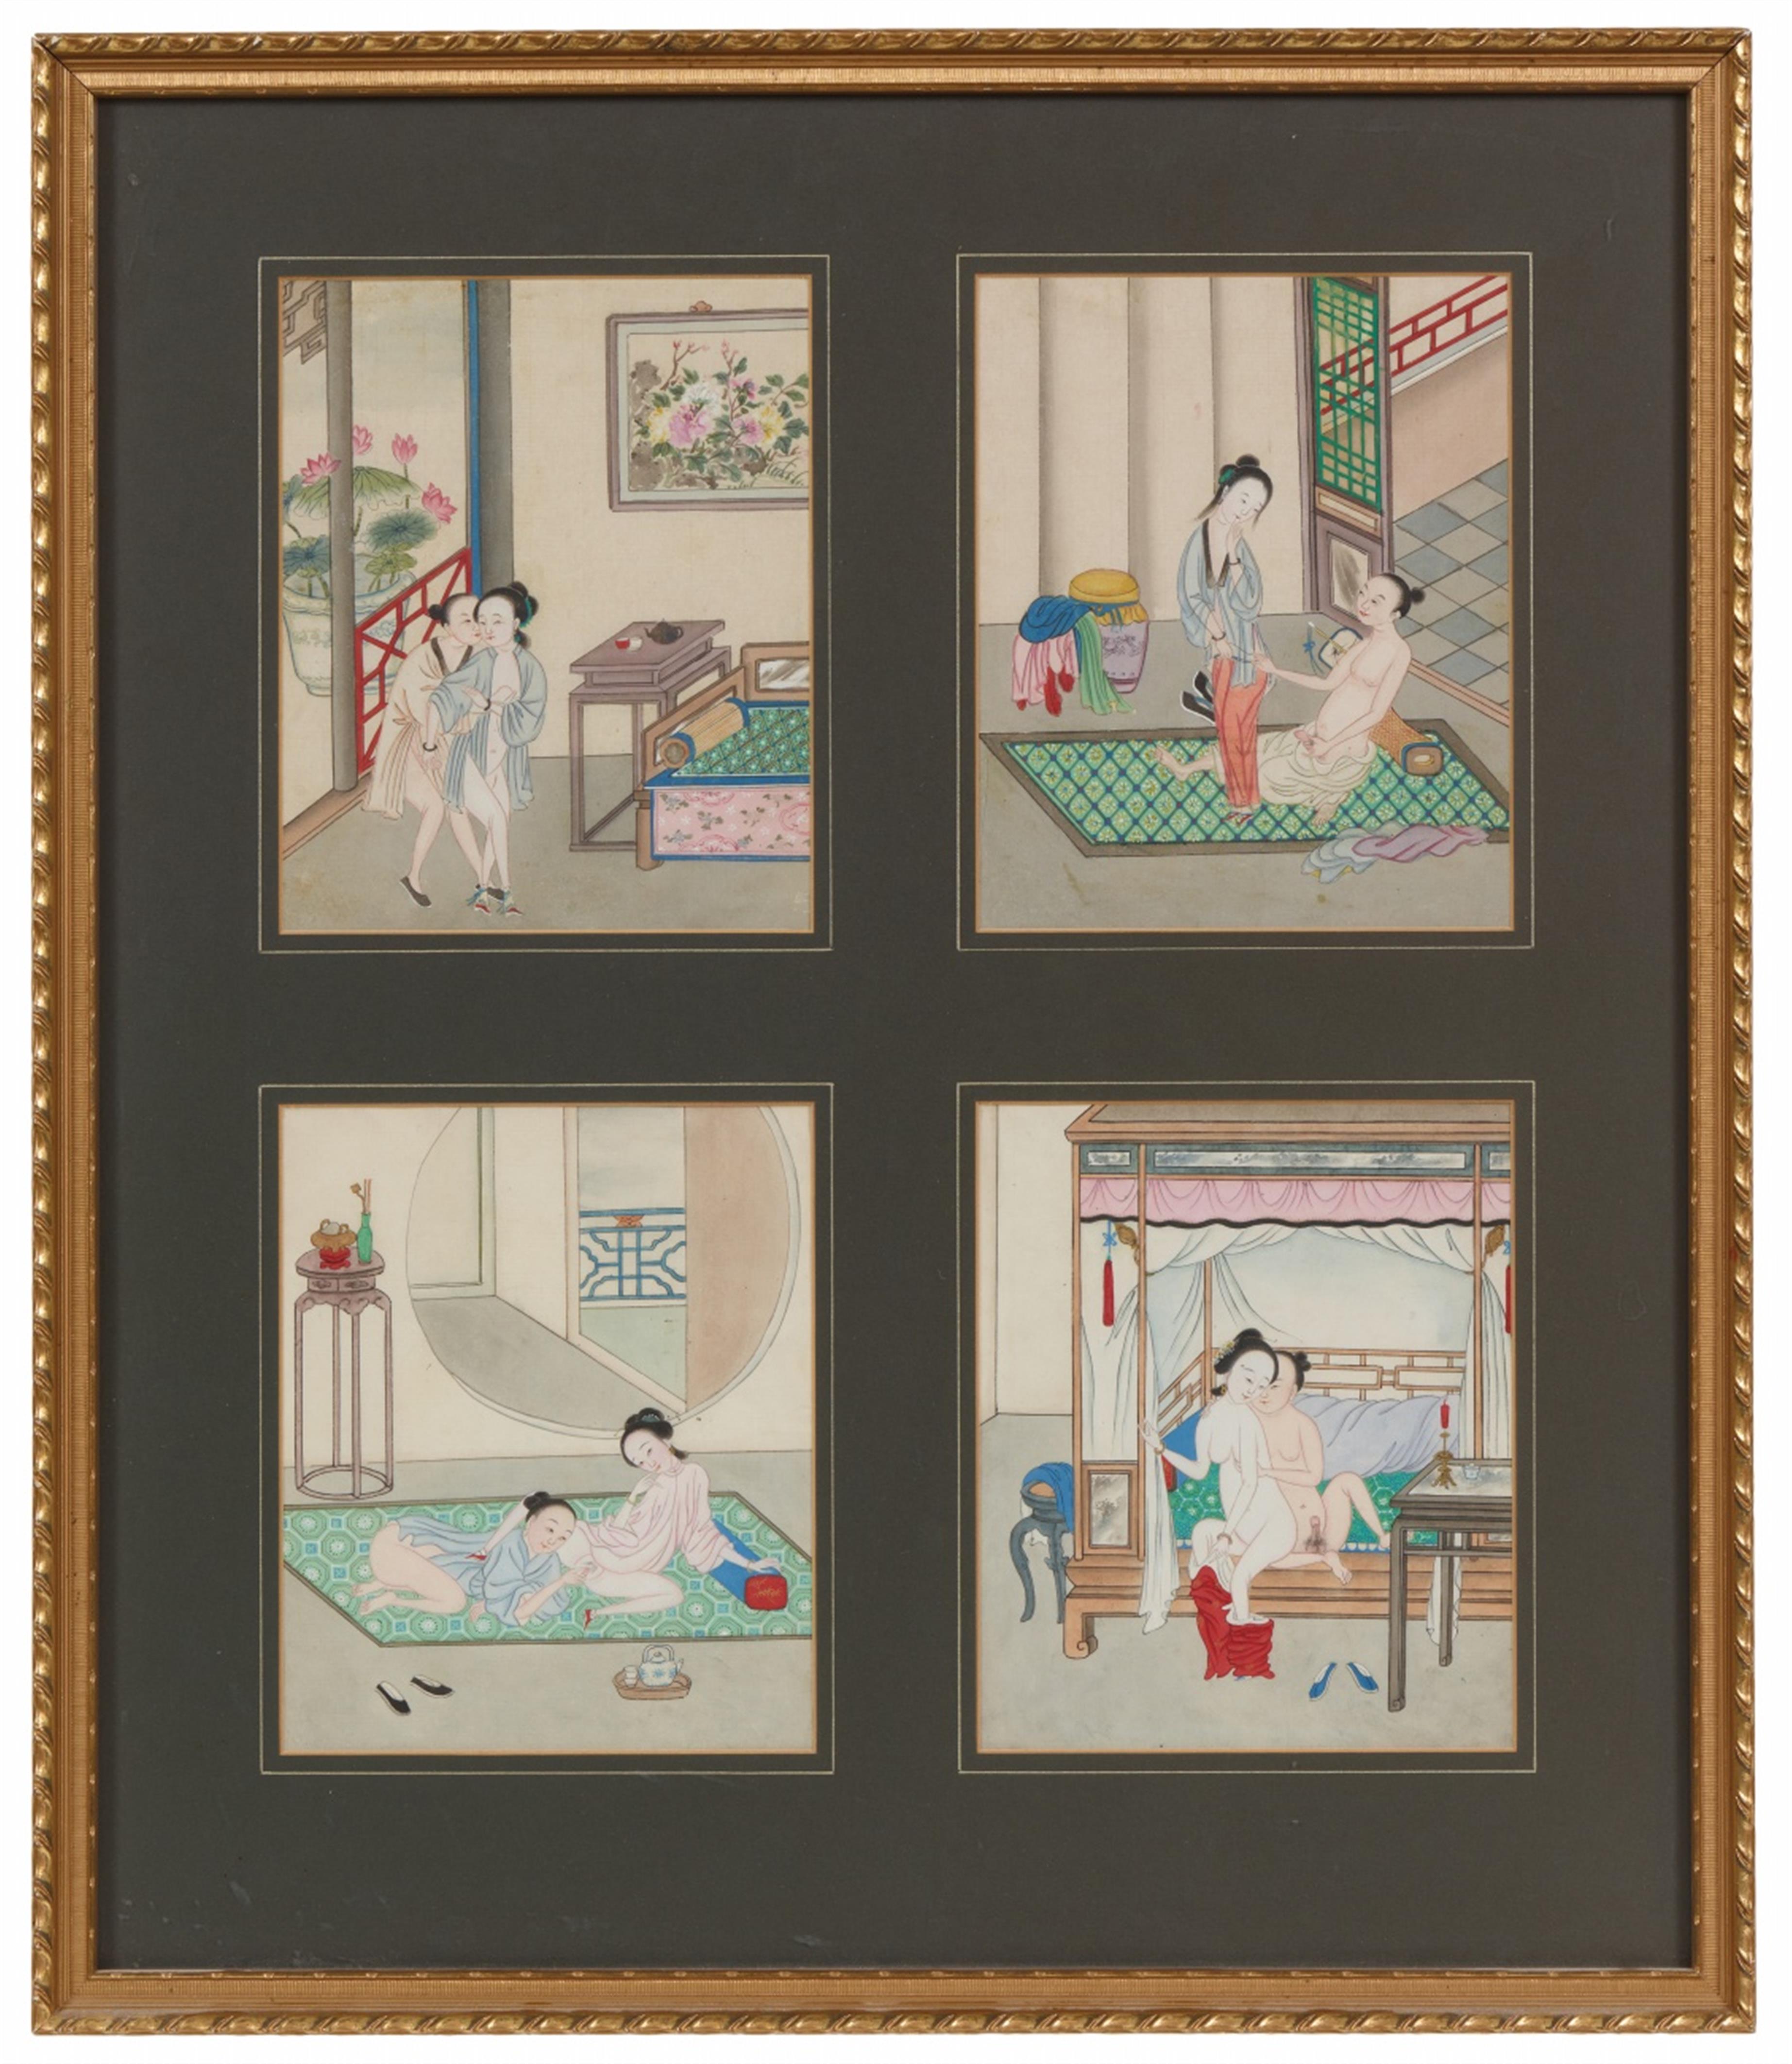 Anonymous painter . Qing dynasty - Four album leaves depicting erotic scenes. Ink and colour on paper. Matted, framed and glazed. - image-1